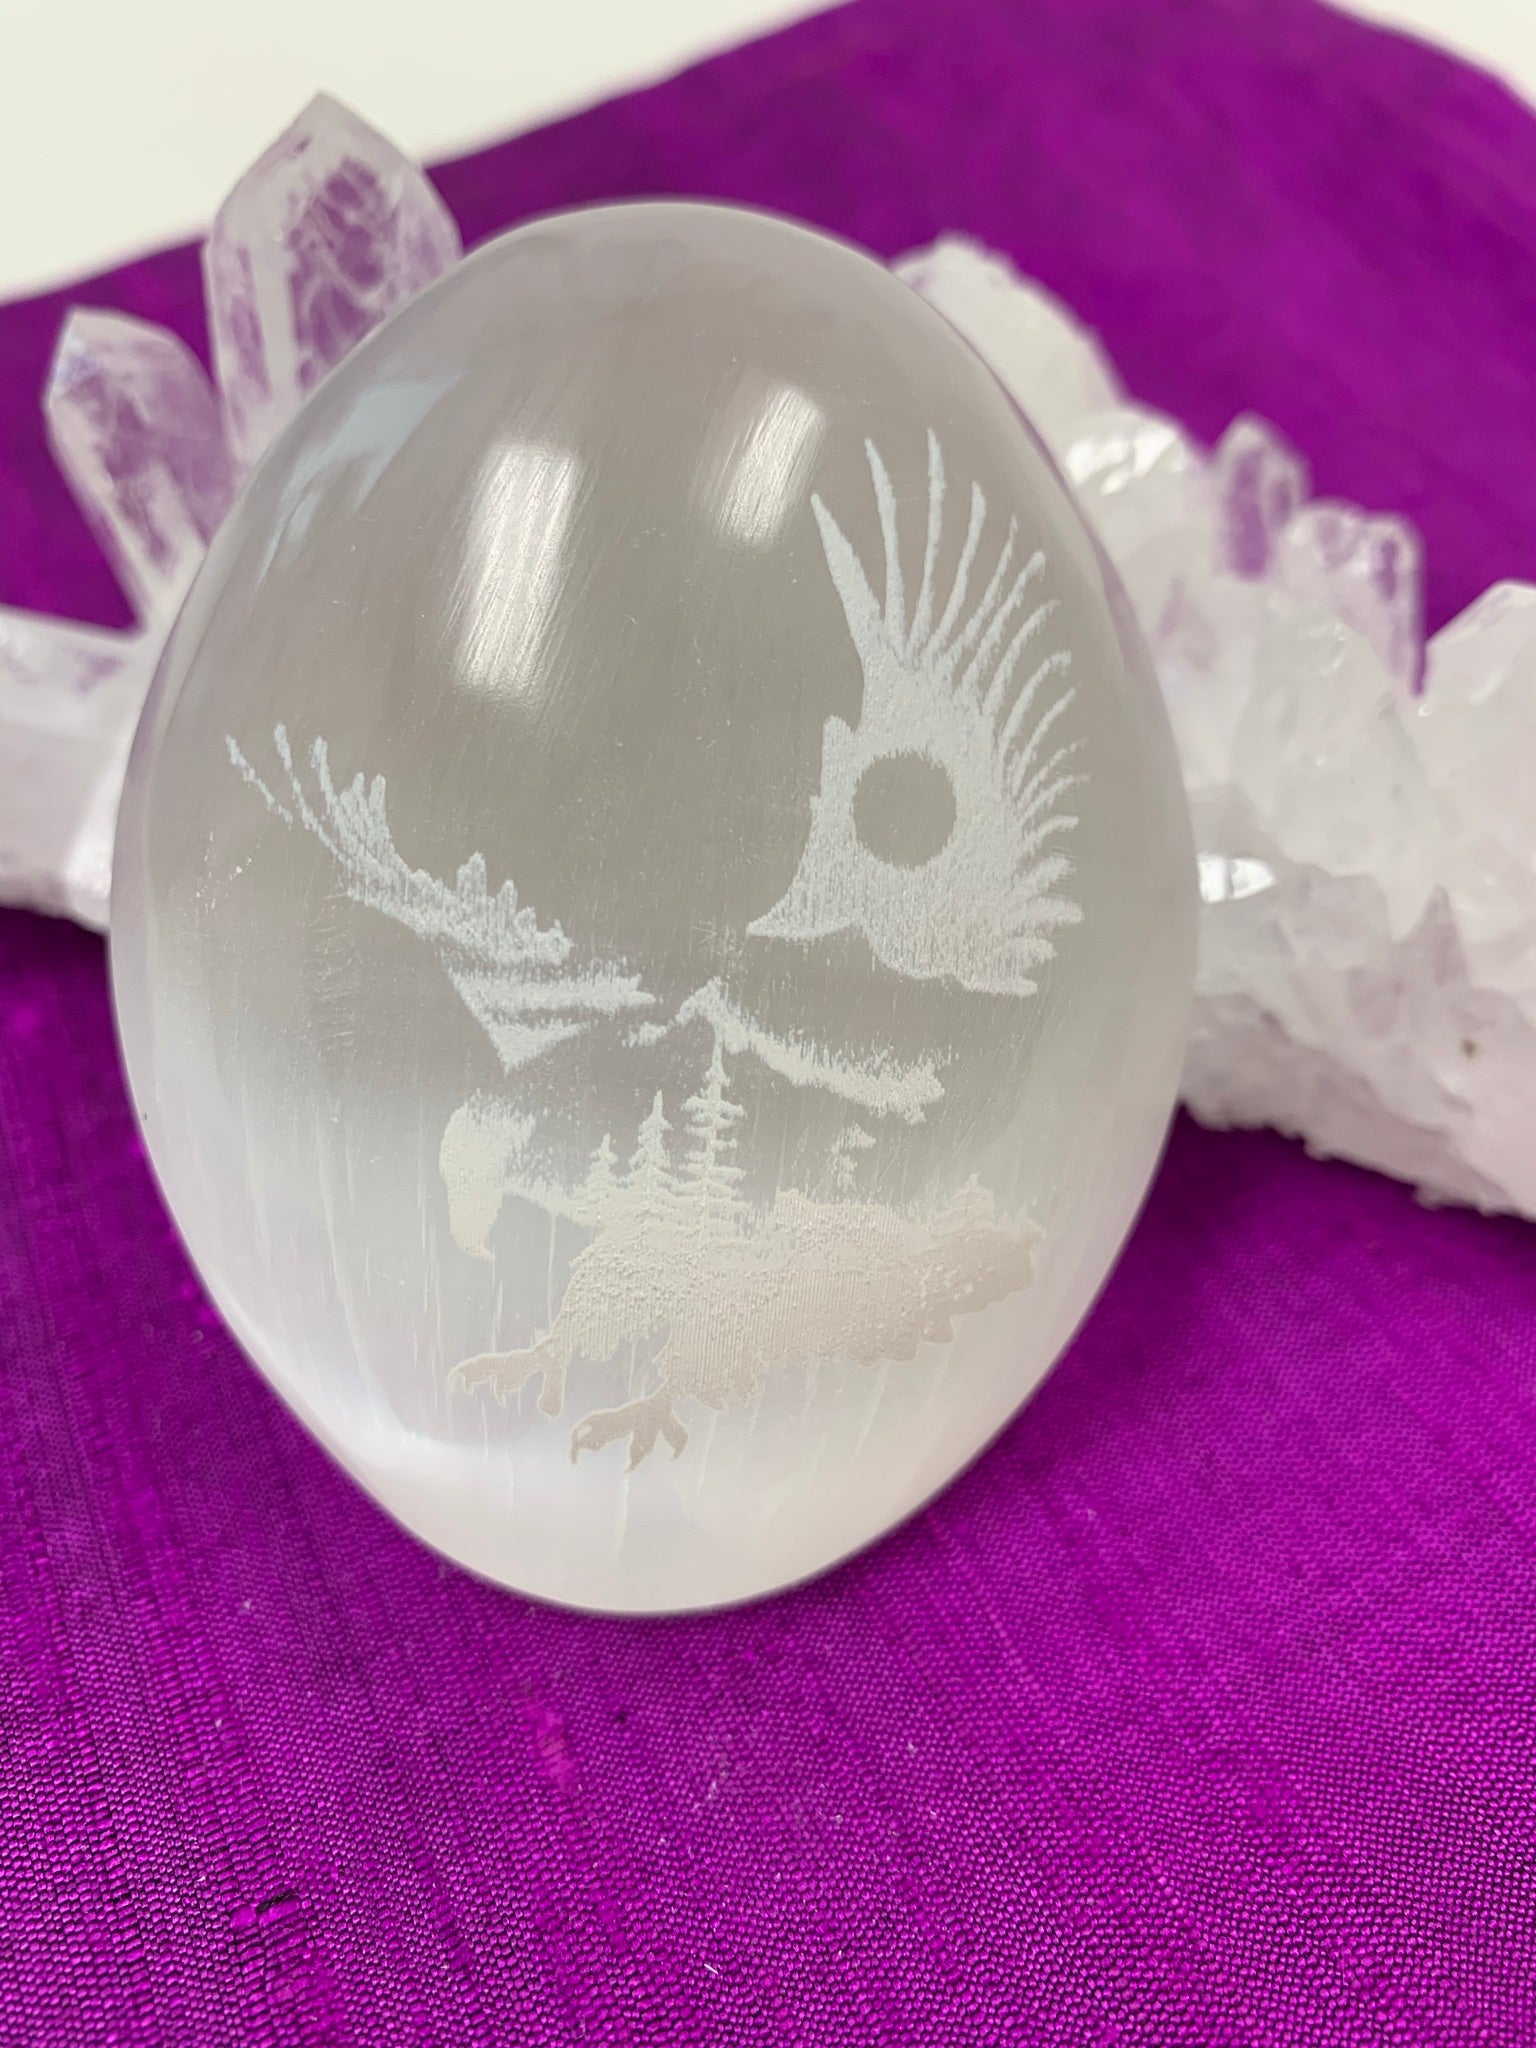 Eagle etched on white selenite palm stone. Selenite can range from translucent to milky white. Eagle is joined with the earth in this etching where the trees are a part of its body and the sun, a part of its wings. Average weight of these palm stones is 4.2 oz and they are approximately 3"x2.5", the perfect size to hold in the palm of your hand. These selenite stones are ethically sourced and workers are paid living wages. 